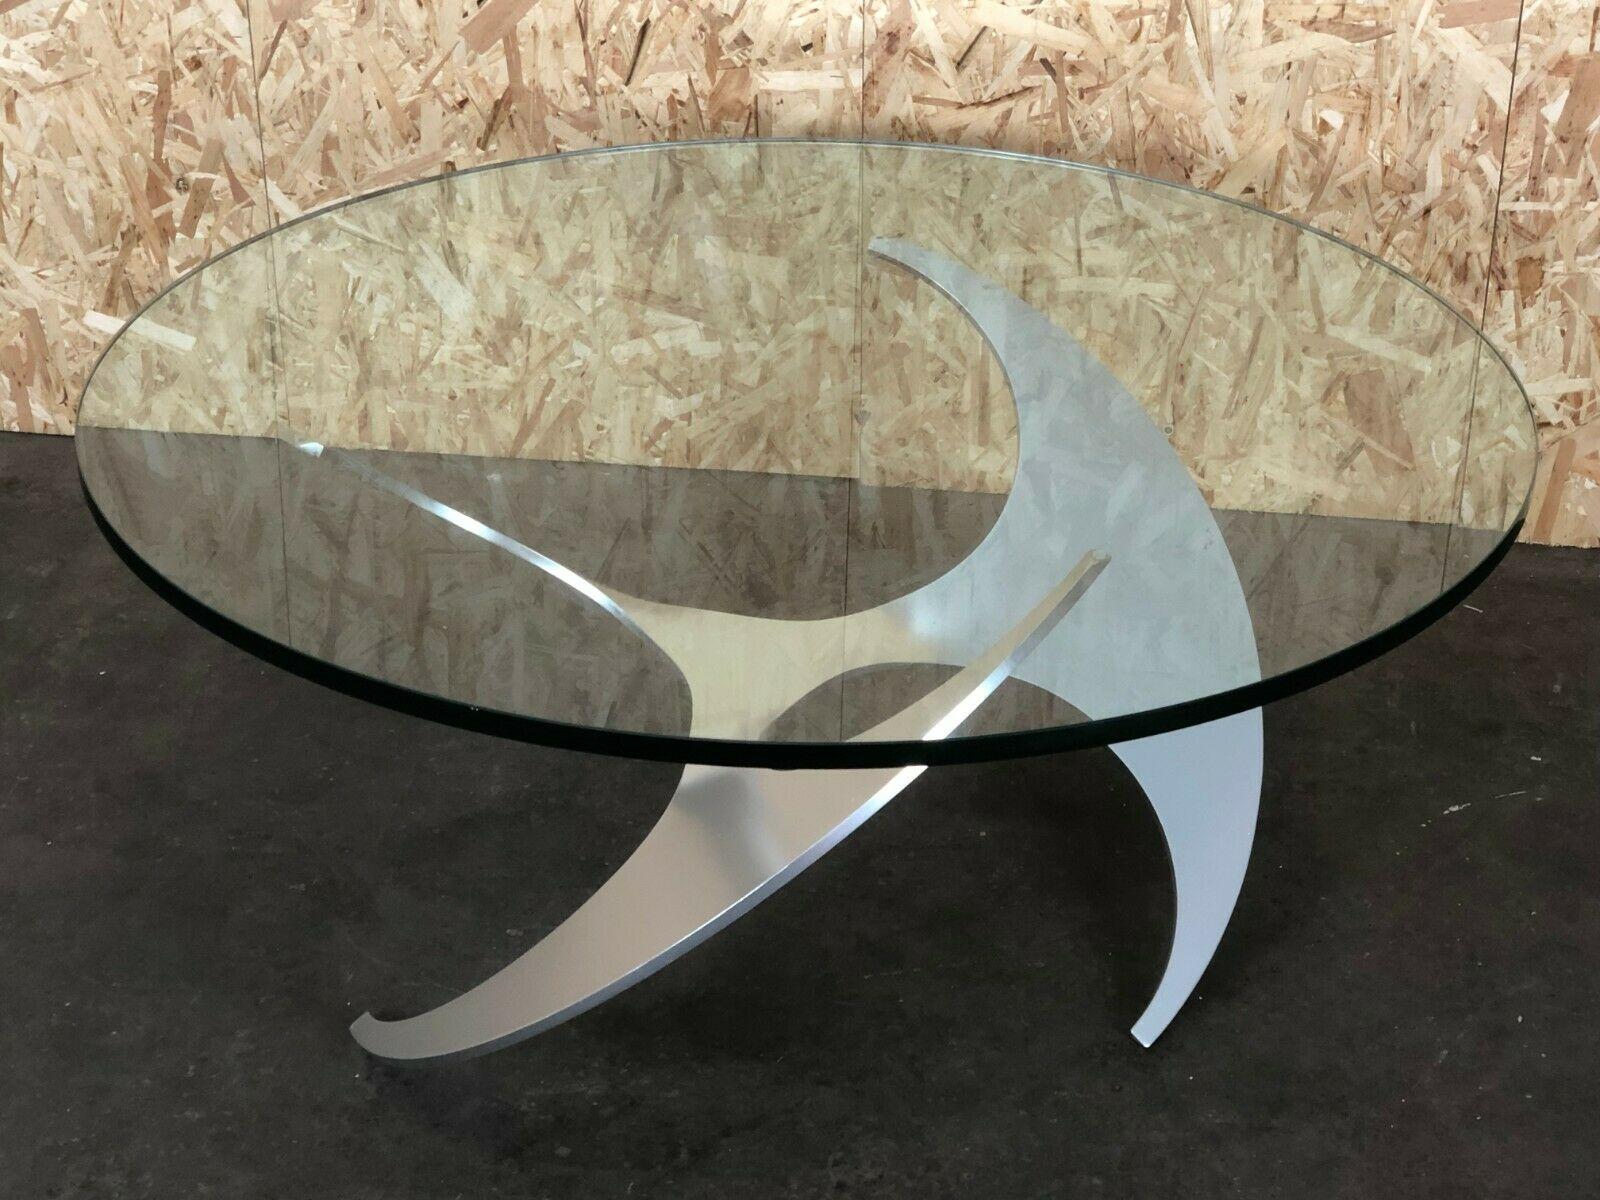 1960s Knut Hesterberg Ronald Schmitt Propeller coffee table Alu

Object: coffee table

Manufacturer:

Condition: good - vintage

Age: around 1960-1970

Dimensions:

Diameter = 110cm
Height = 49cm
Plate thickness = 2cm

Other